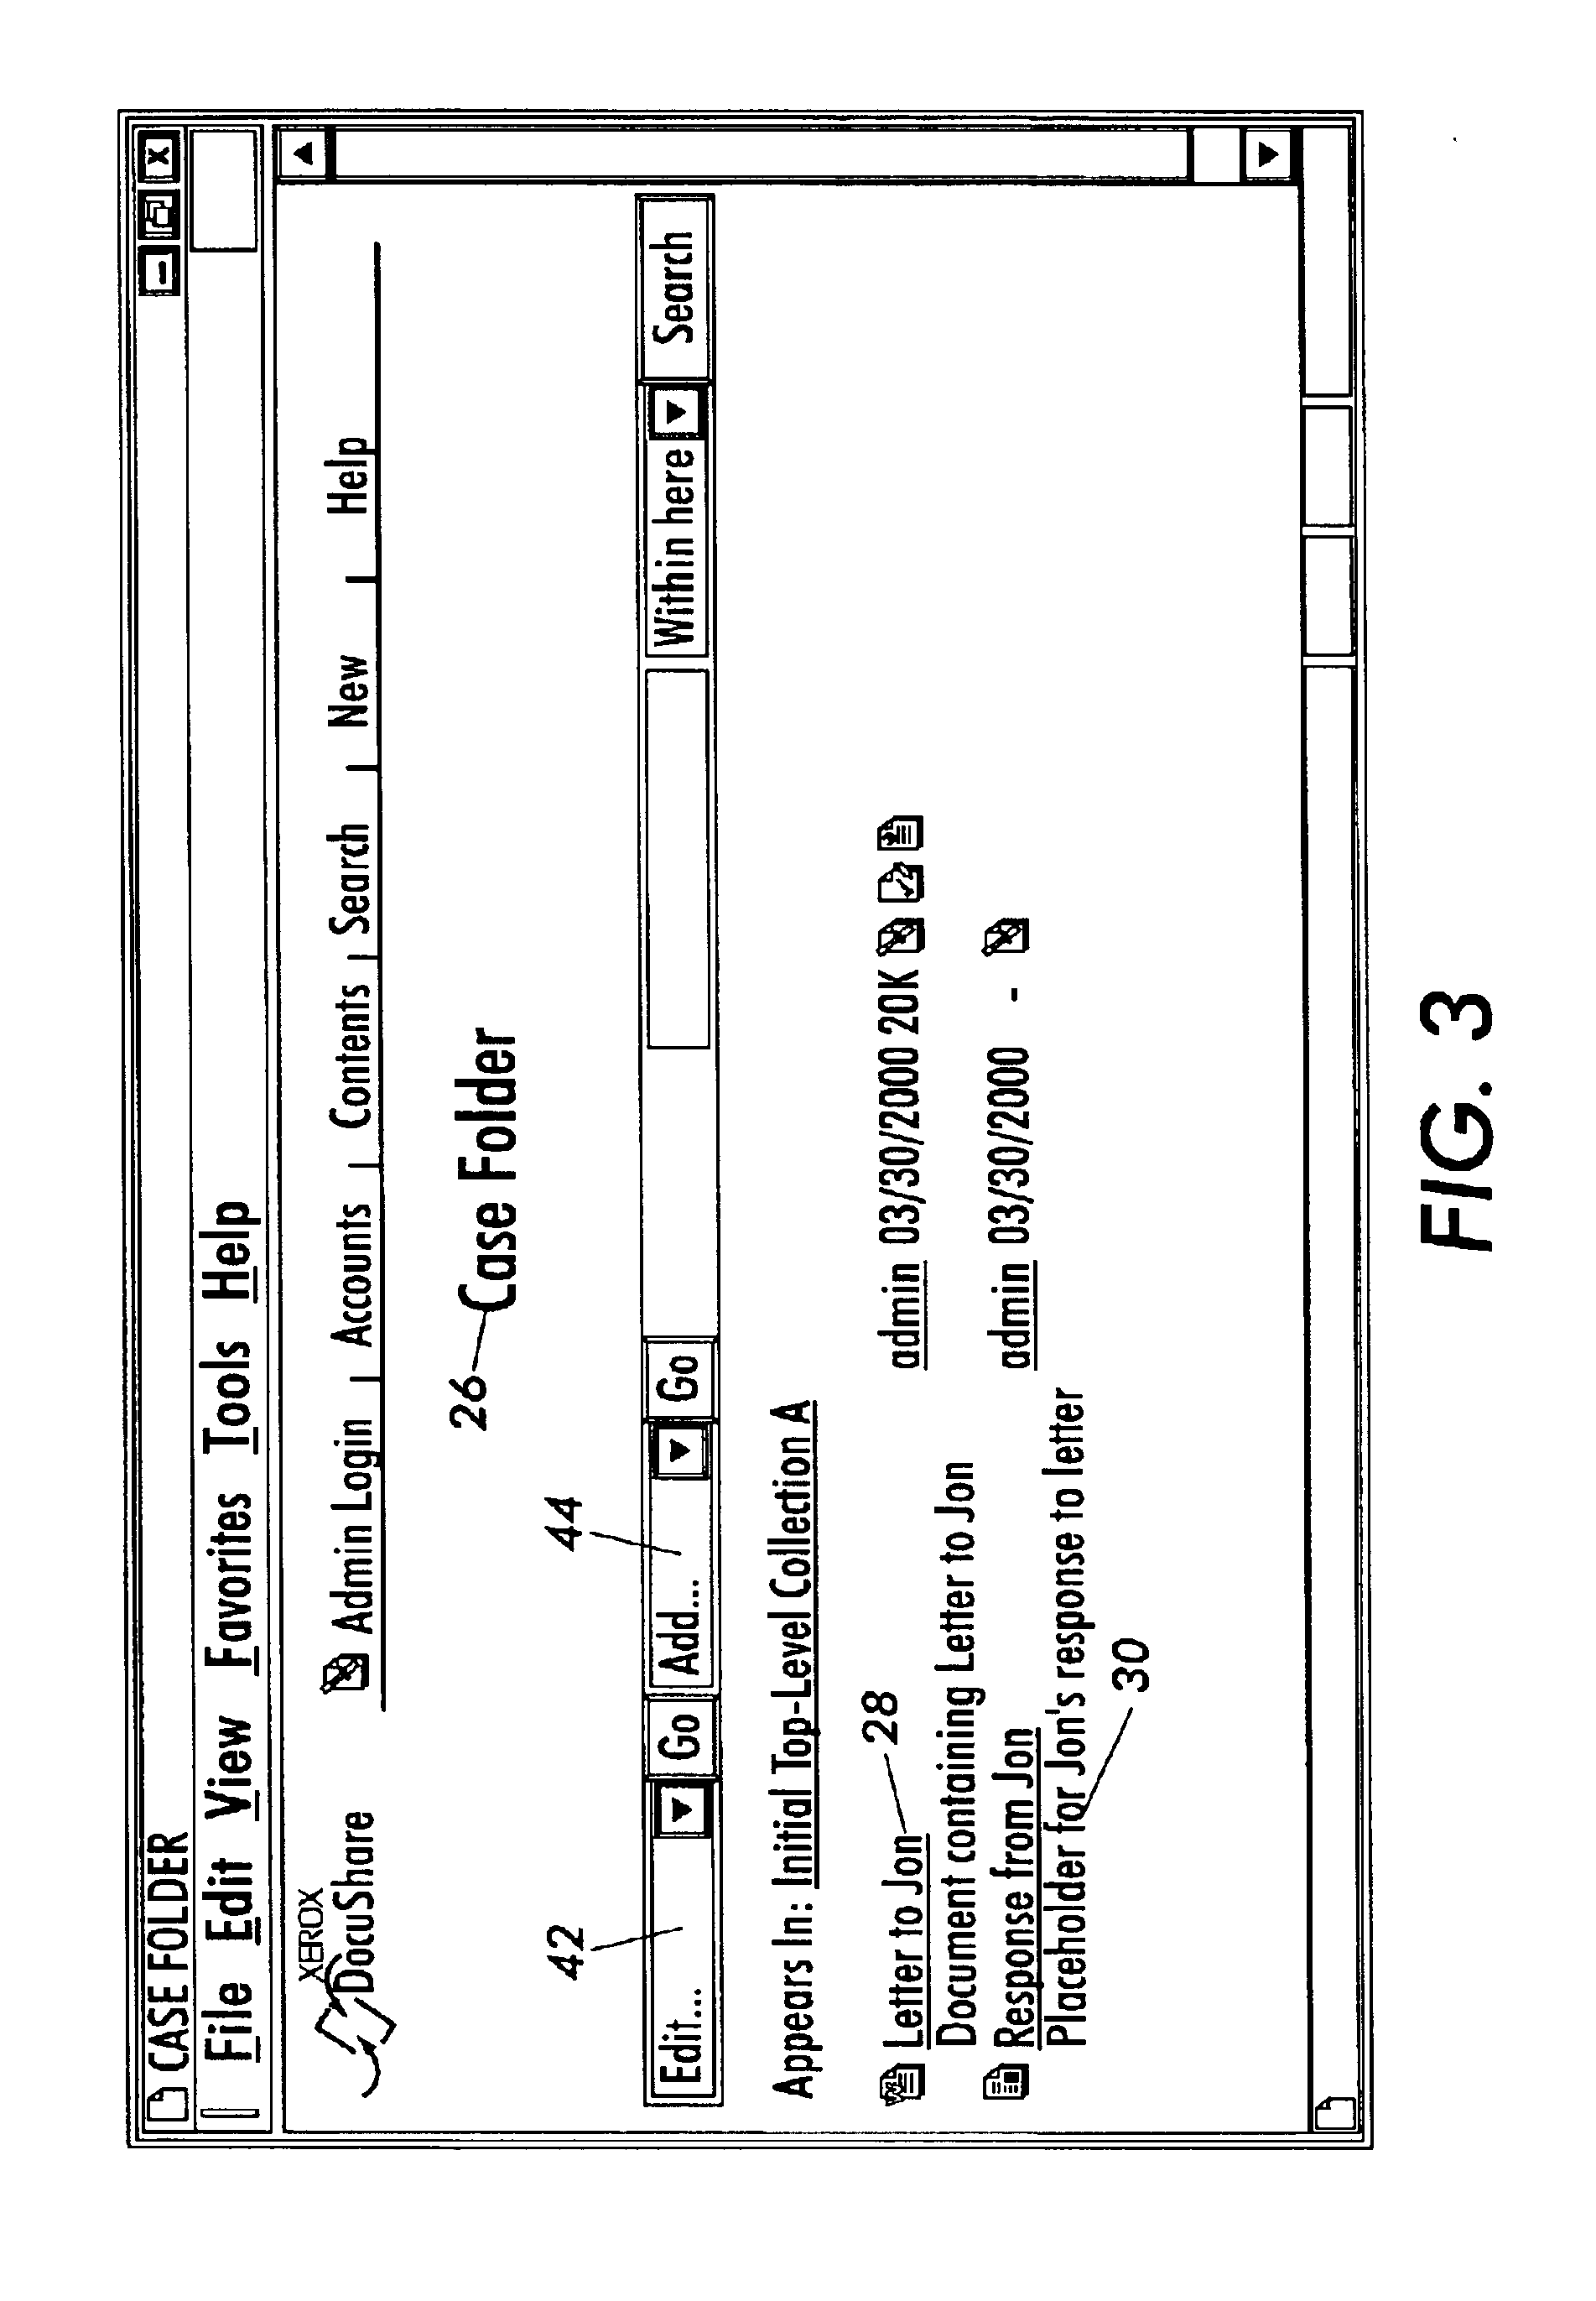 Electronic filing system with file-placeholders